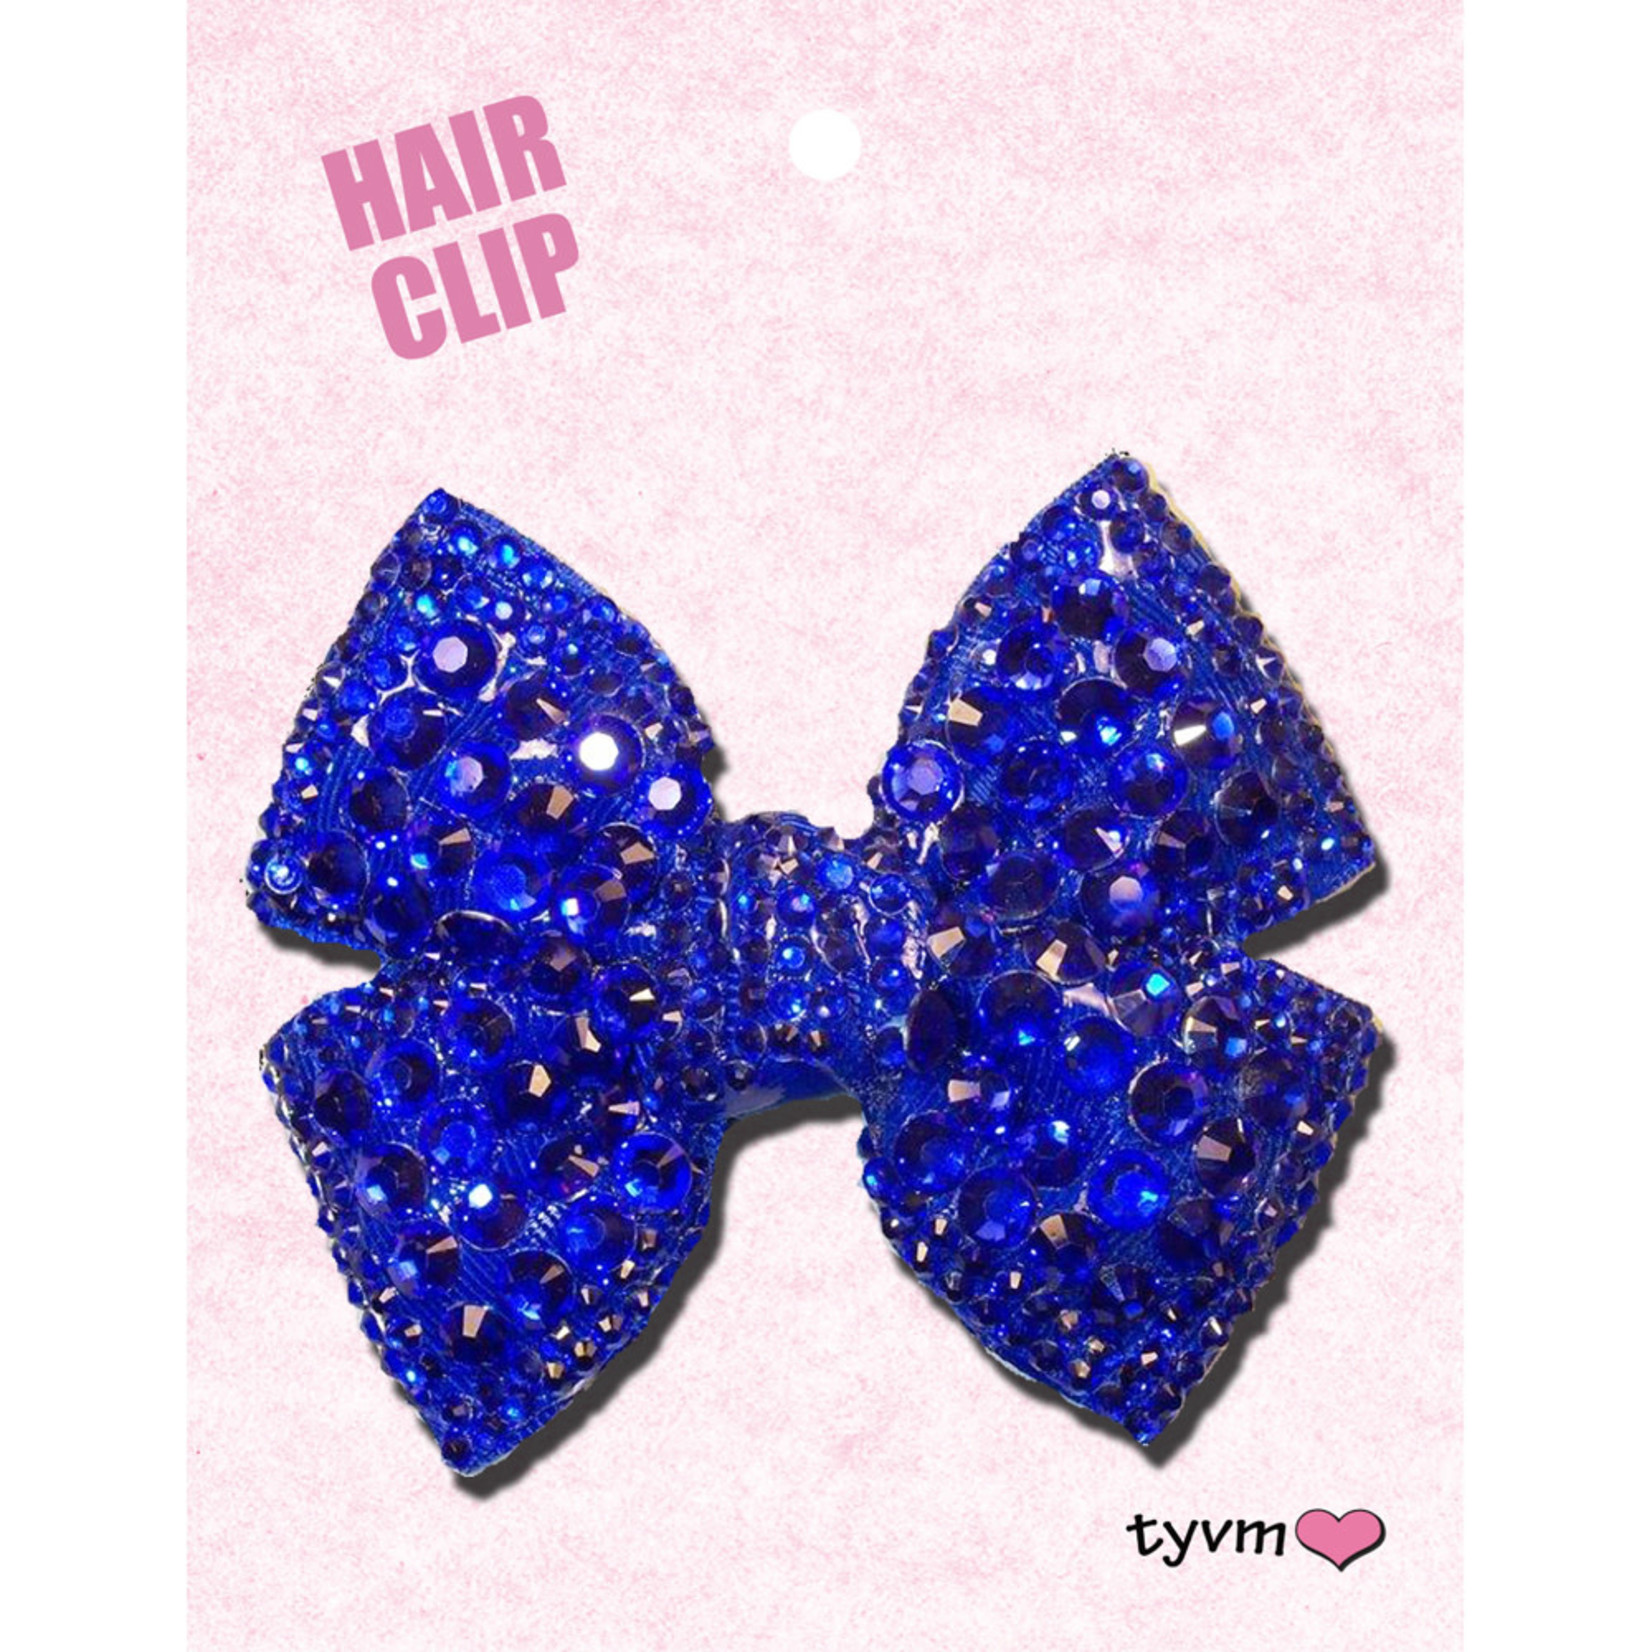 tyvm 49522 Crystalized Hair Bows